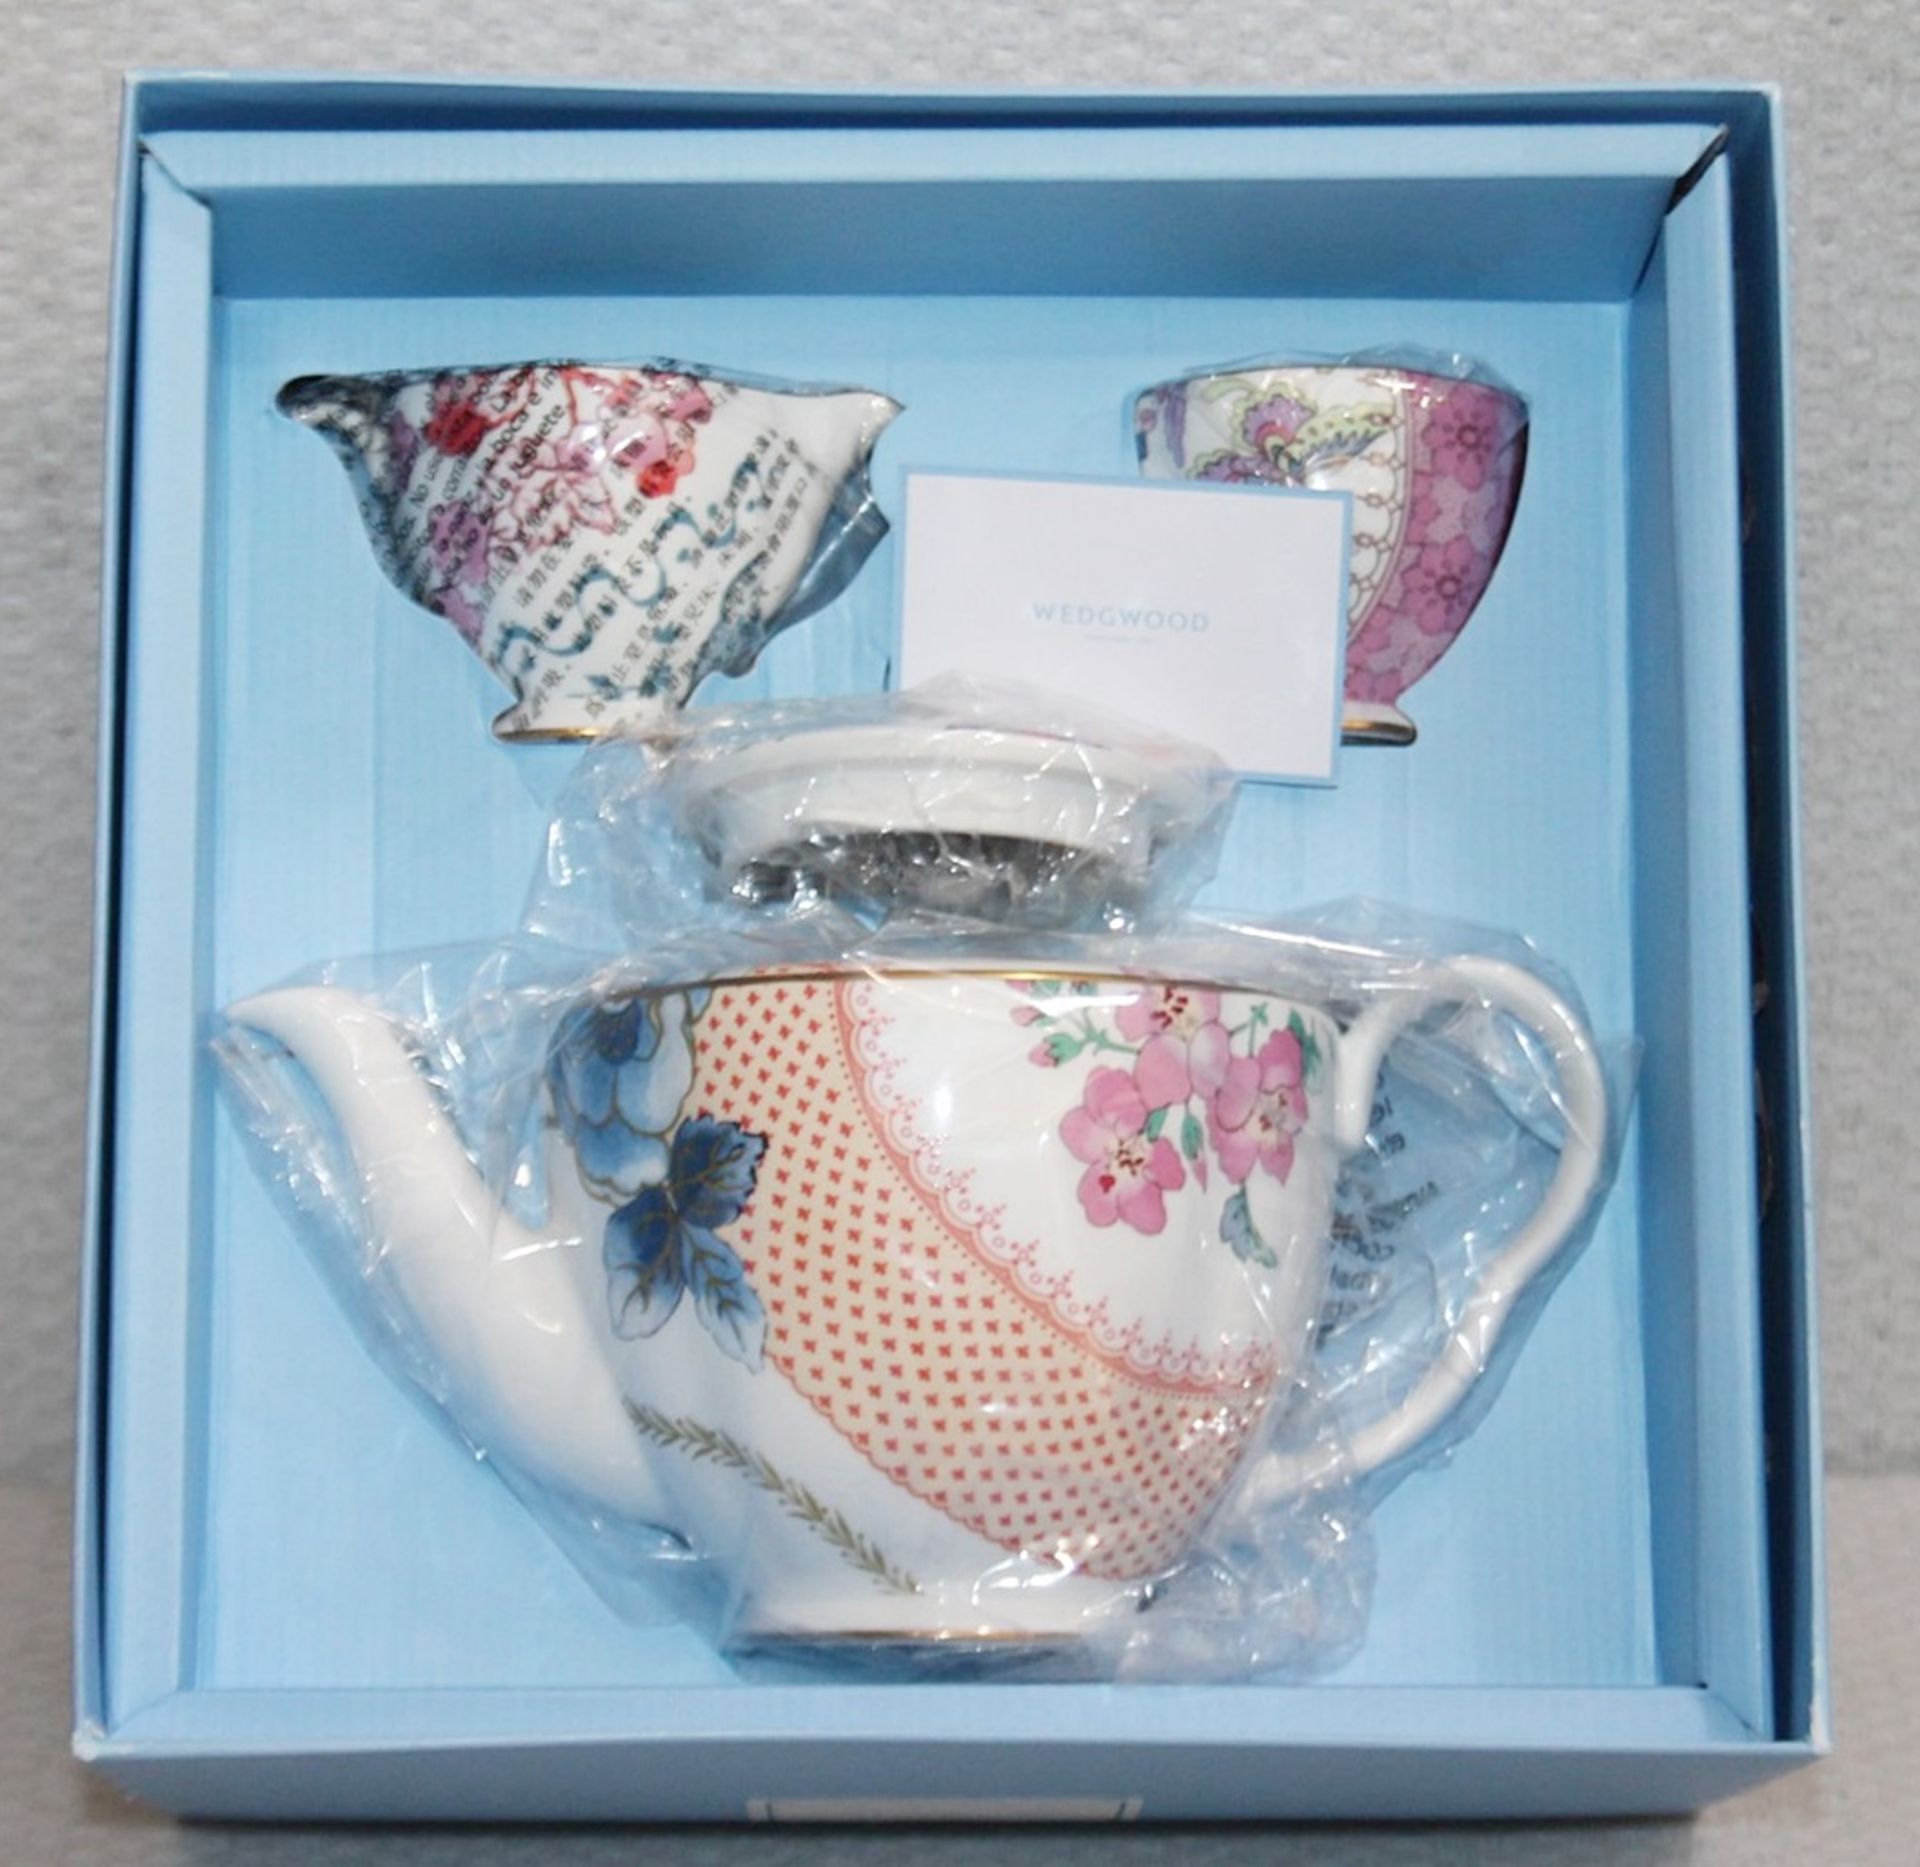 1 x WEDGWOOD 'Butterfly Bloom' Fine Bone China Teapot, Creamer And Sugar Bowl Set - RRP £195.00 - Image 2 of 8